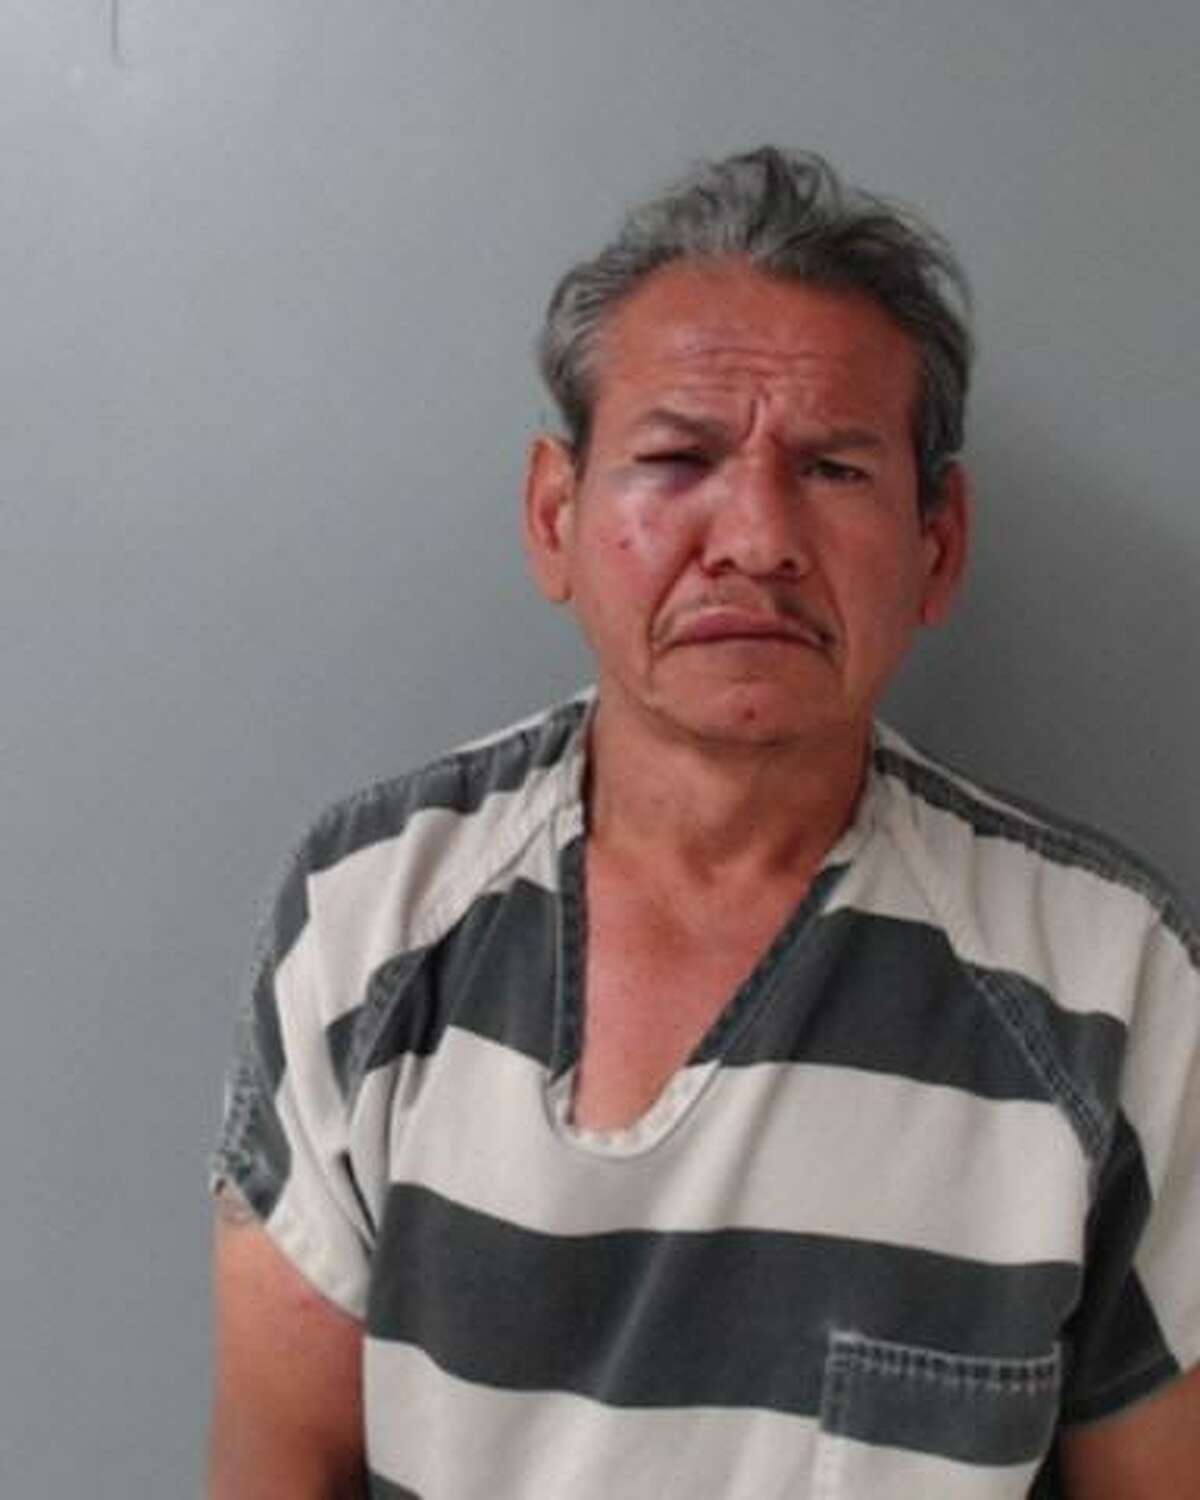 Gerardo Noe Lara, 52, was arrested on the charges of two counts of assault on a public servant, resisting arrest, criminal mischief and terroristic threat, family violence.